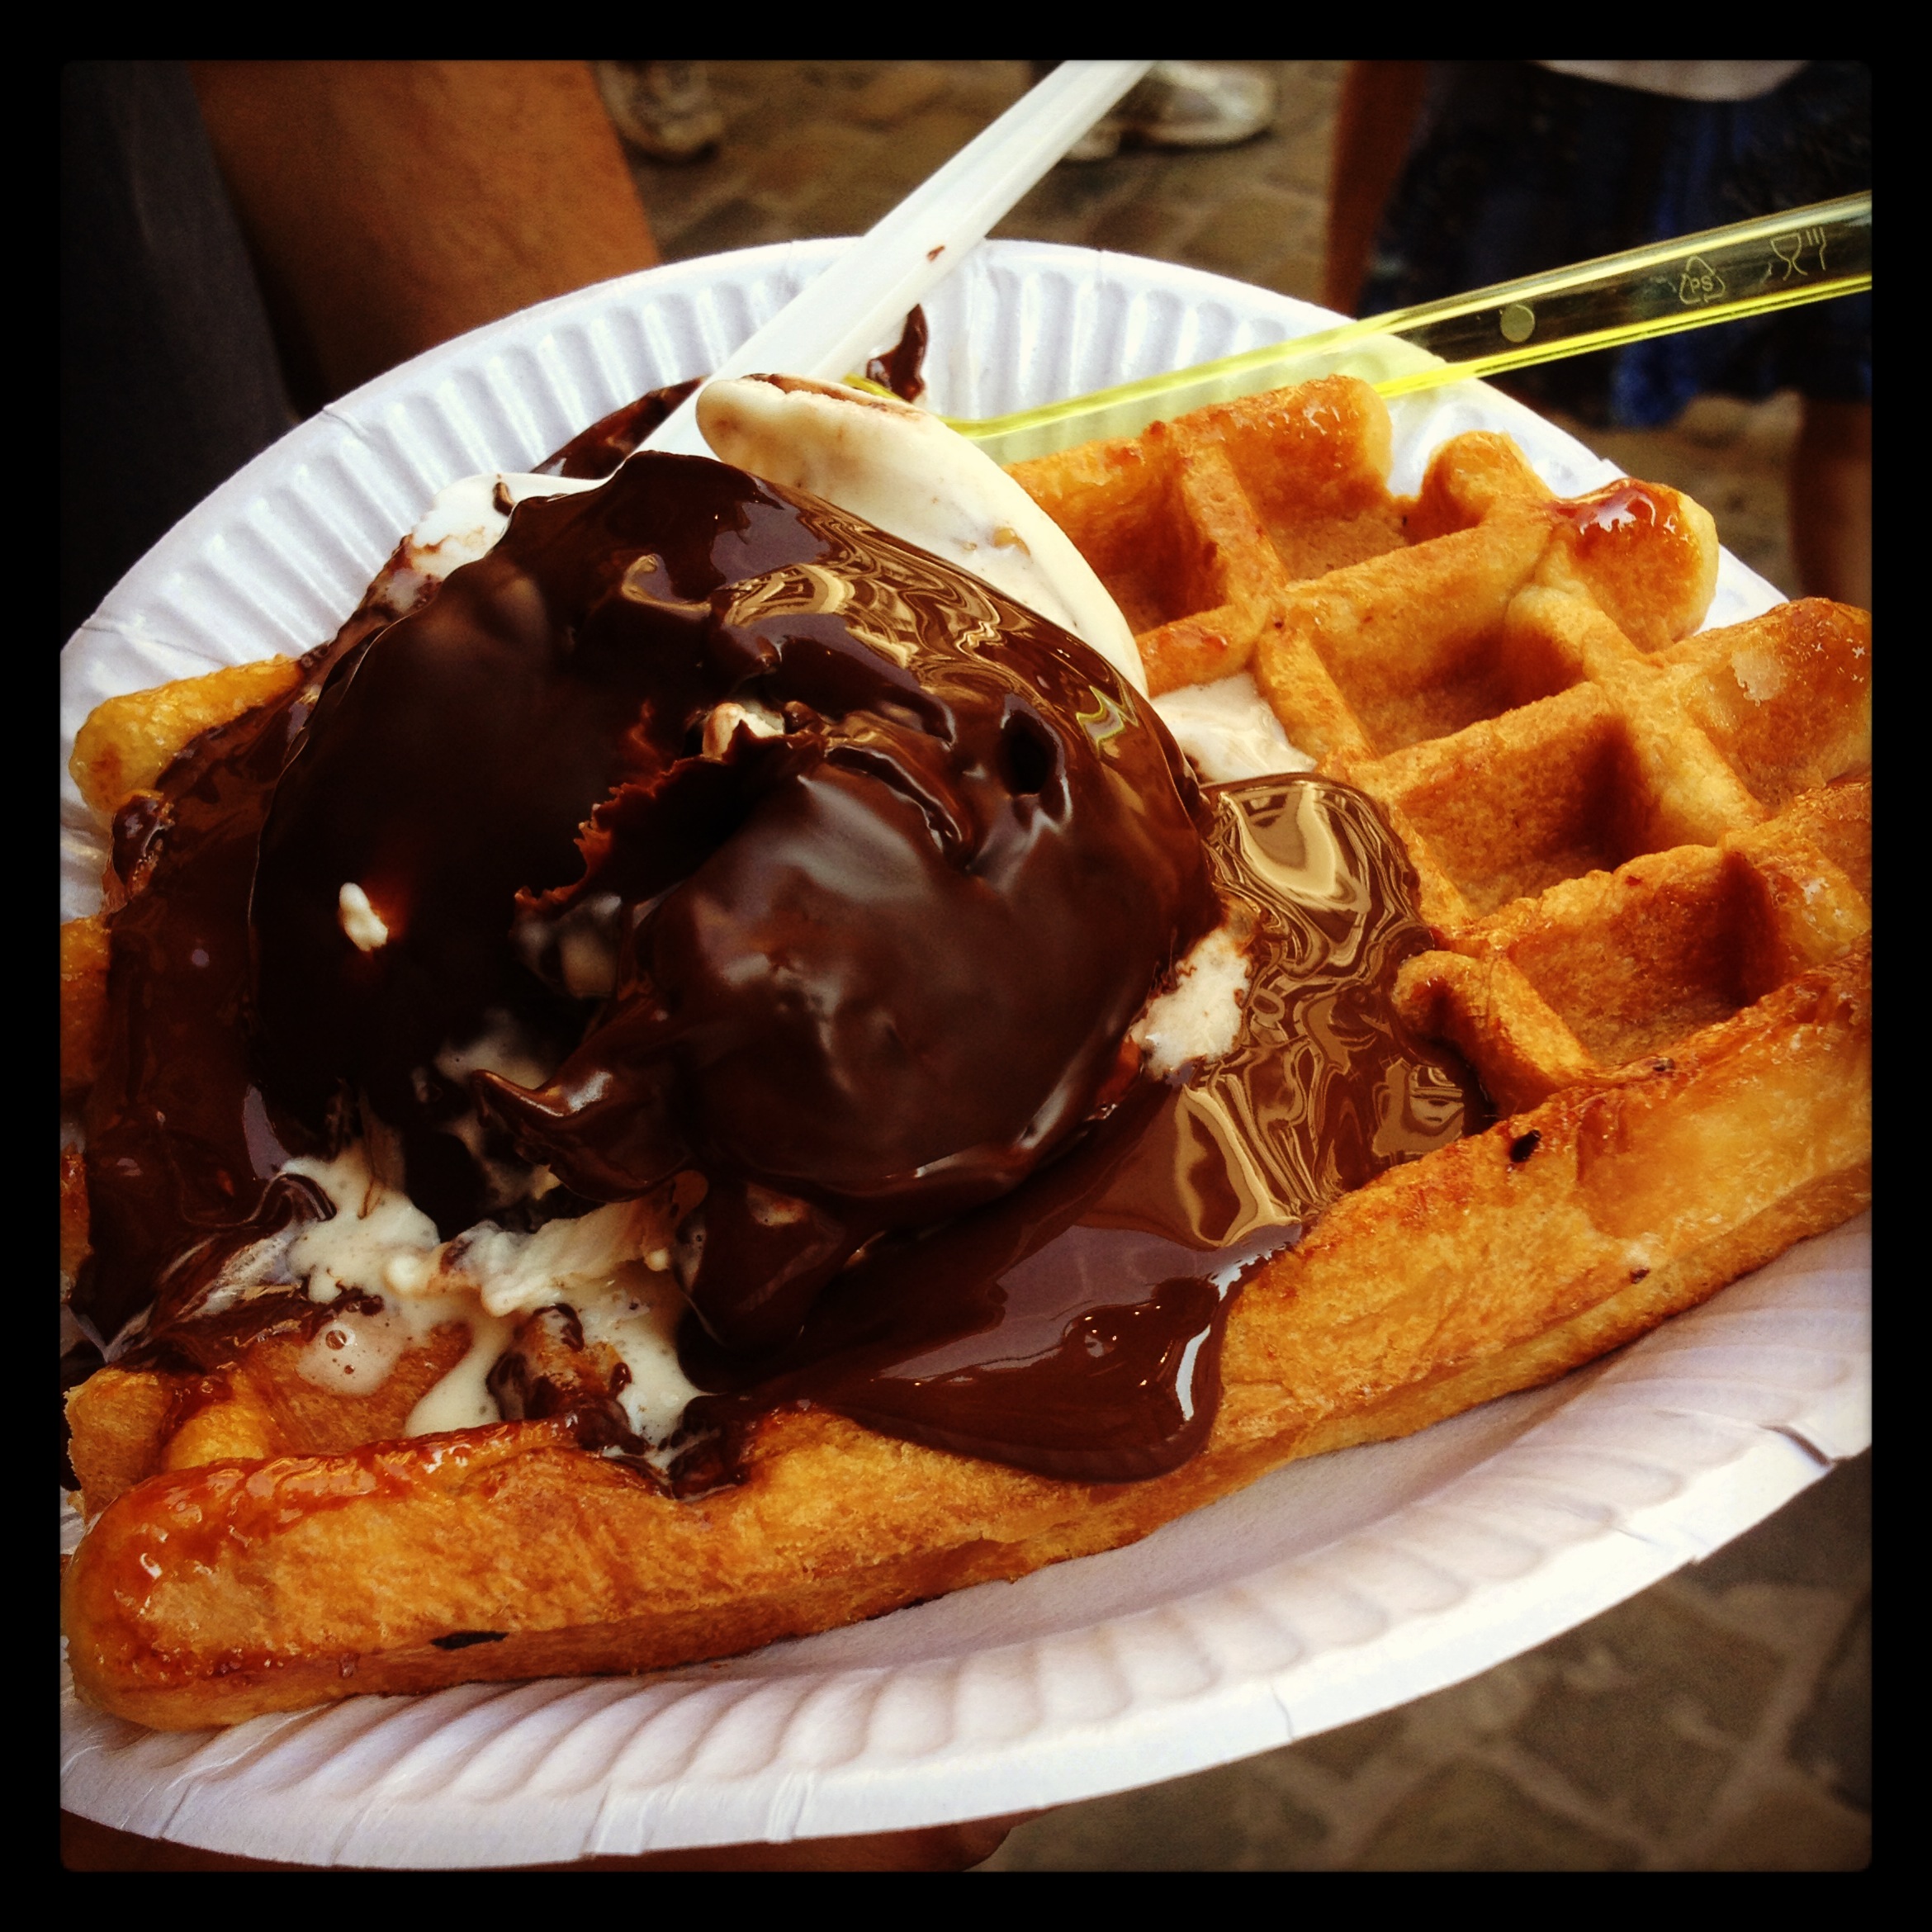 Belgian Waffle topped with ice cream and chocolate sauce